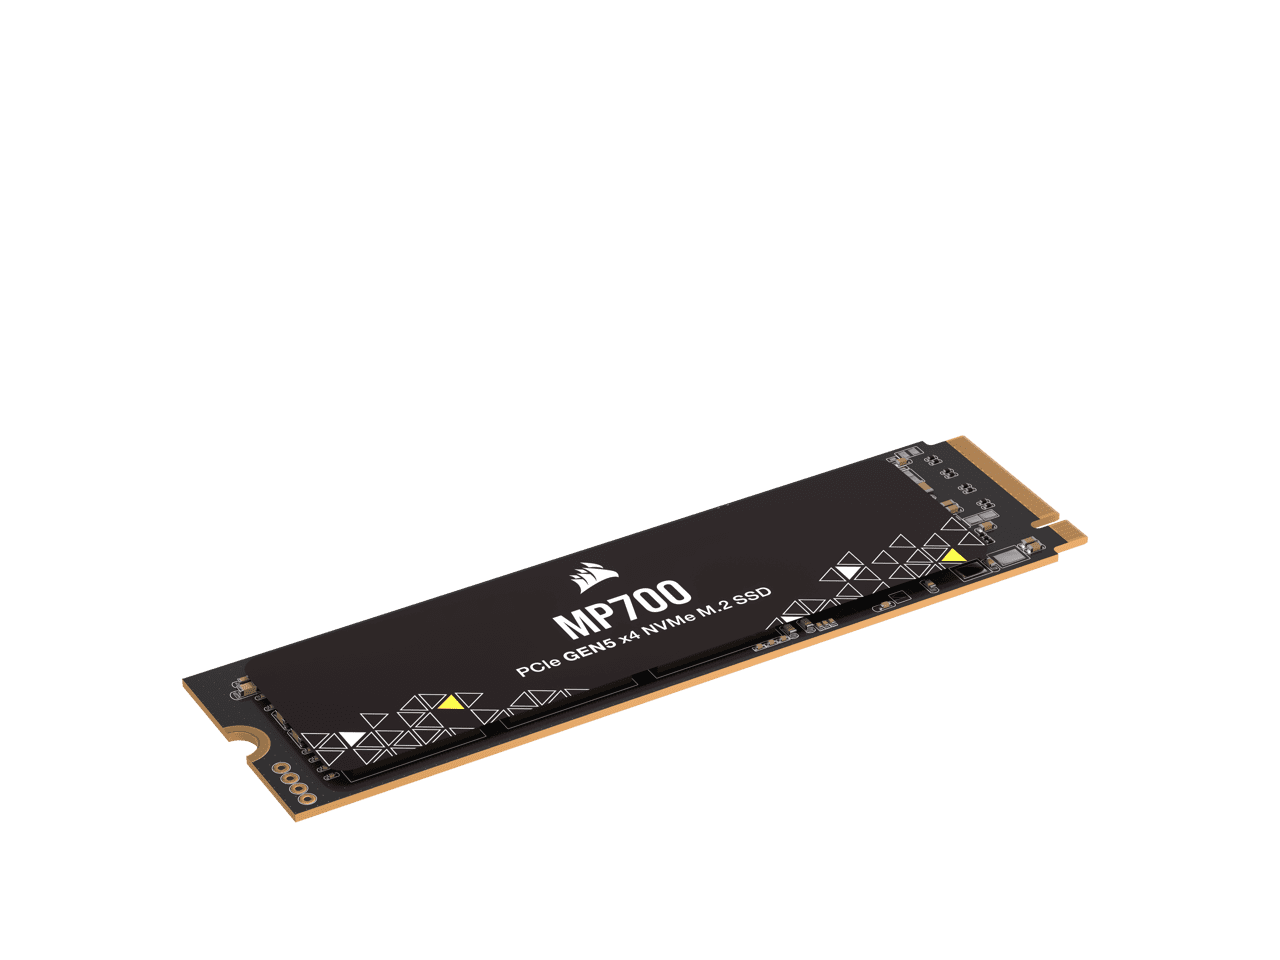 Corsair teases MP700 PCIe Gen5 x4 NVMe SSDs with up to 10 GB/s sequential  read speed 